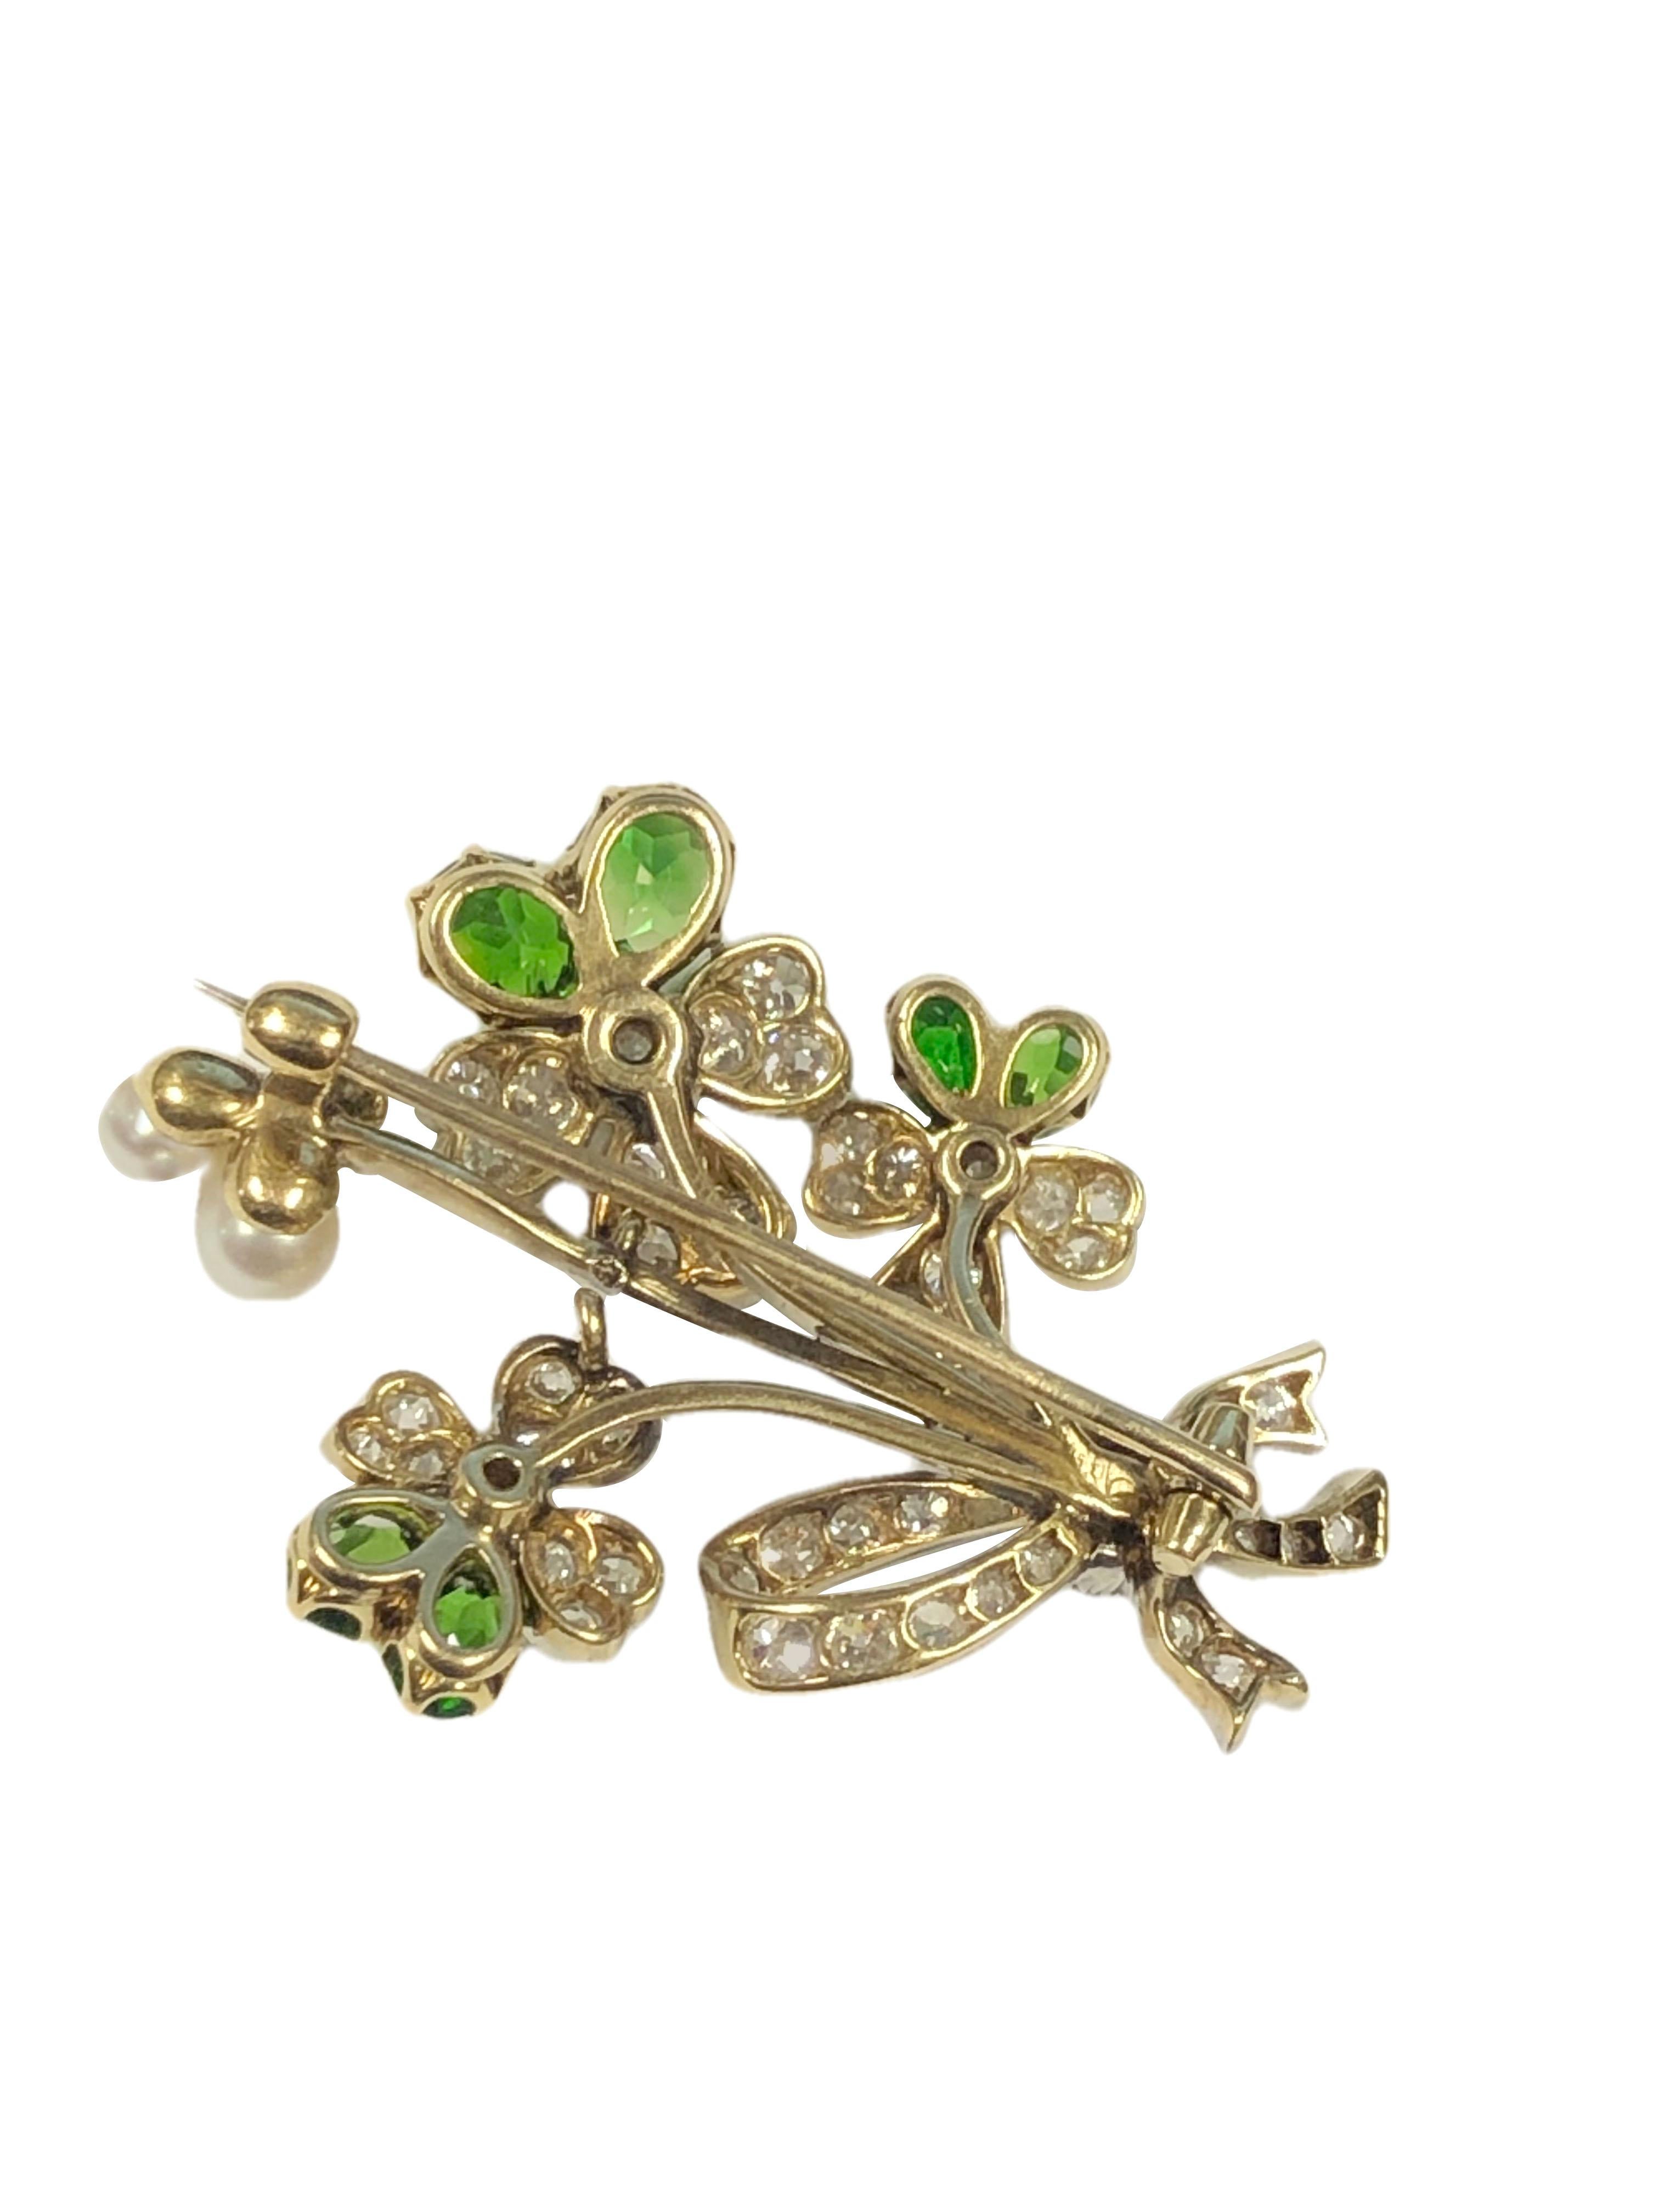 Circa 1920 Platinum and Diamond brooch, in a flower grouping form, measuring 1 5/8 inches in length X 1 1/8 inches. Set with Phenomenal intense Gem color Demantoid Garnets that are most likely Russian from the Ural region, the larger two are old cut